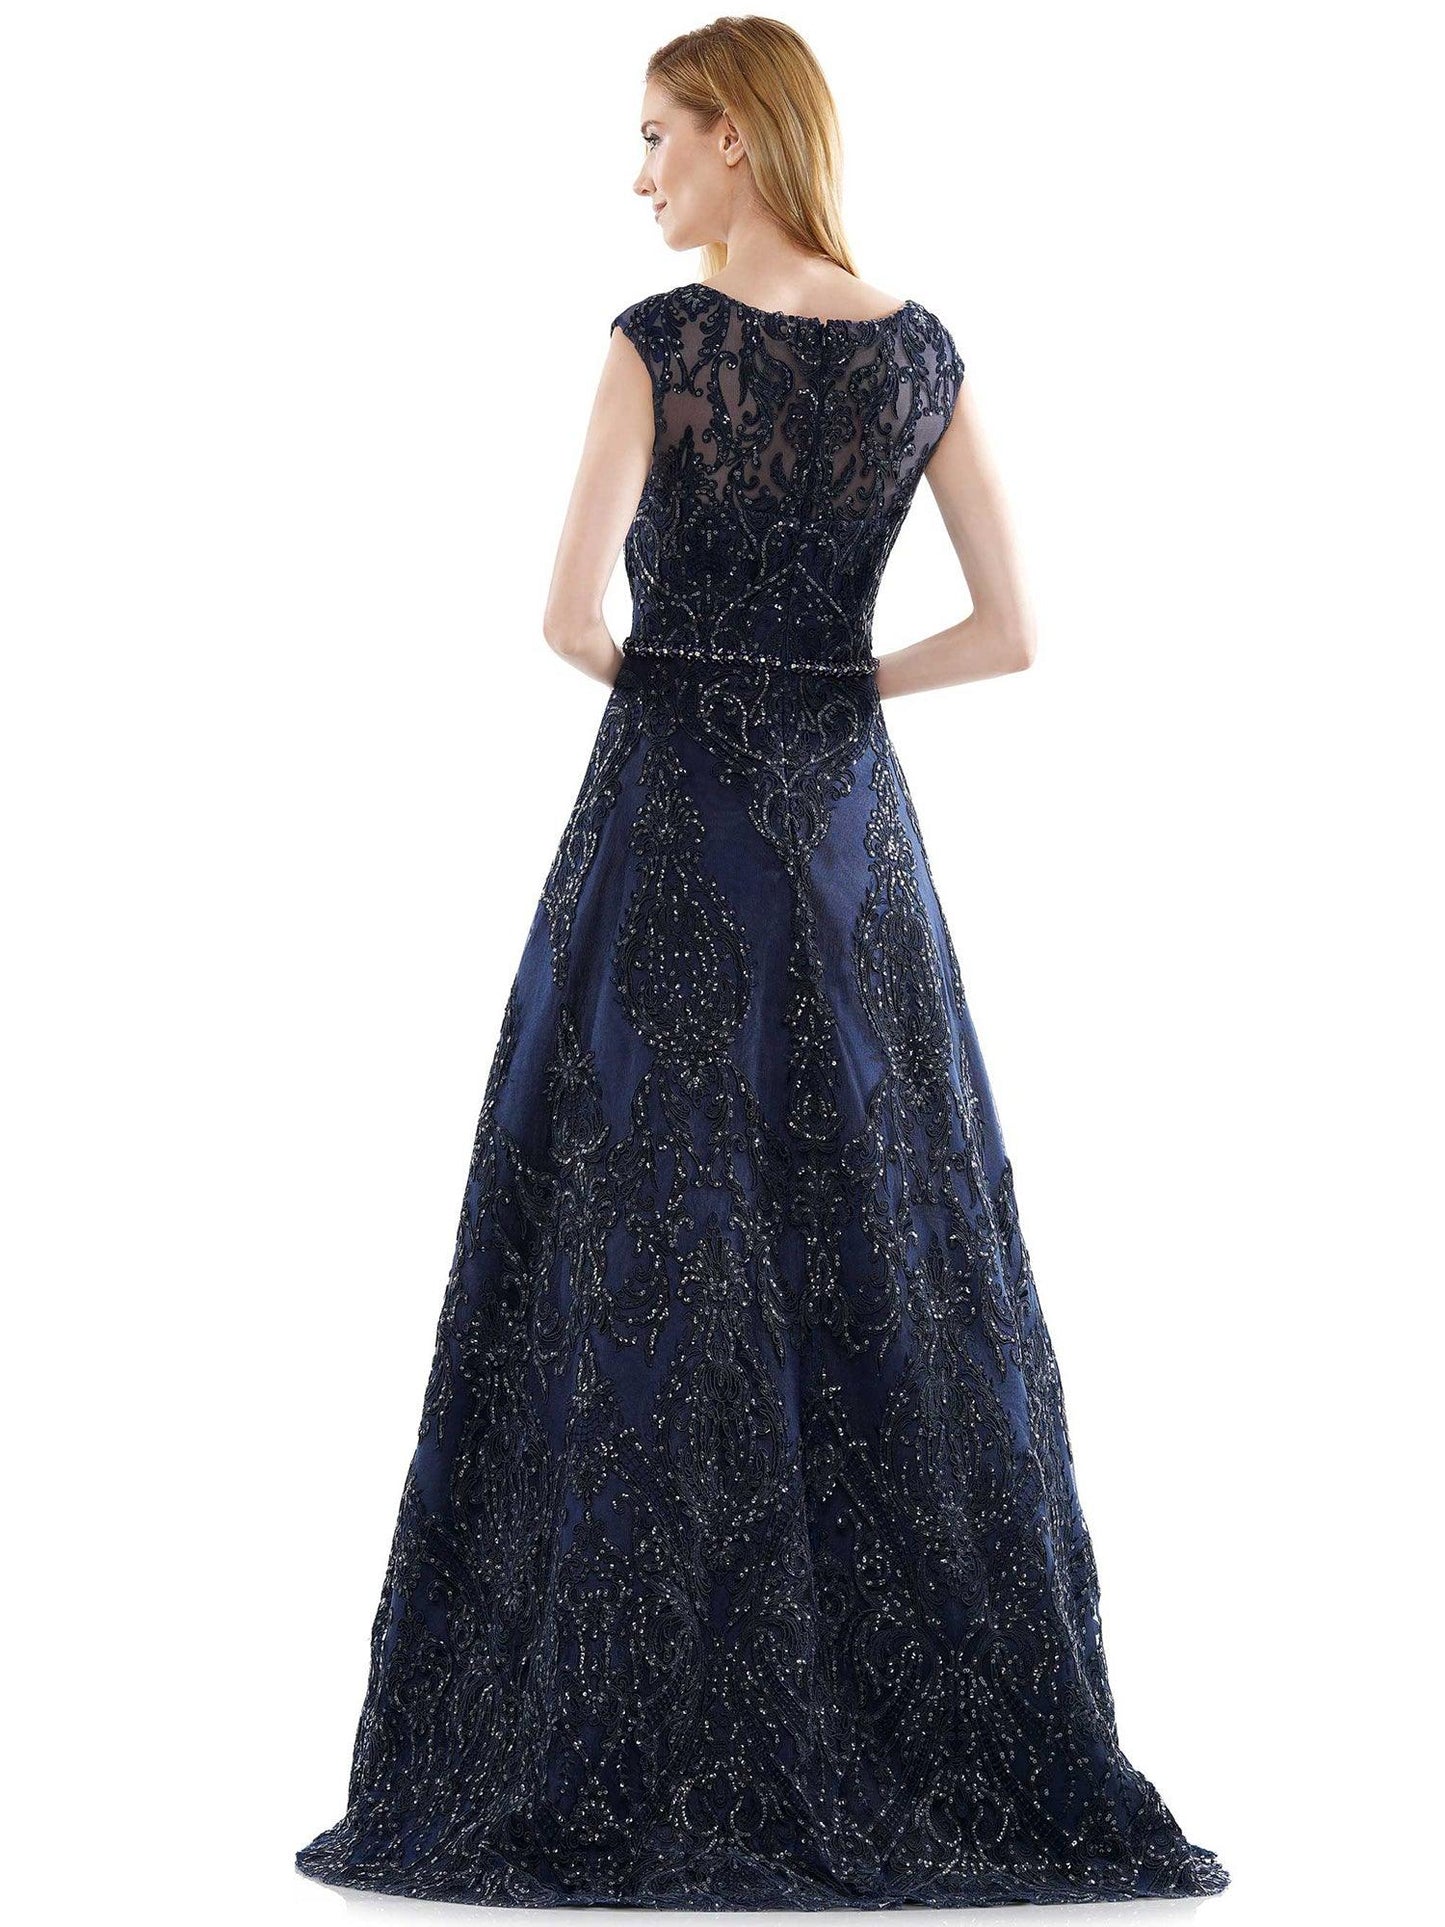 Marsoni Long Mother of the Bride Formal Dress 1092 - The Dress Outlet